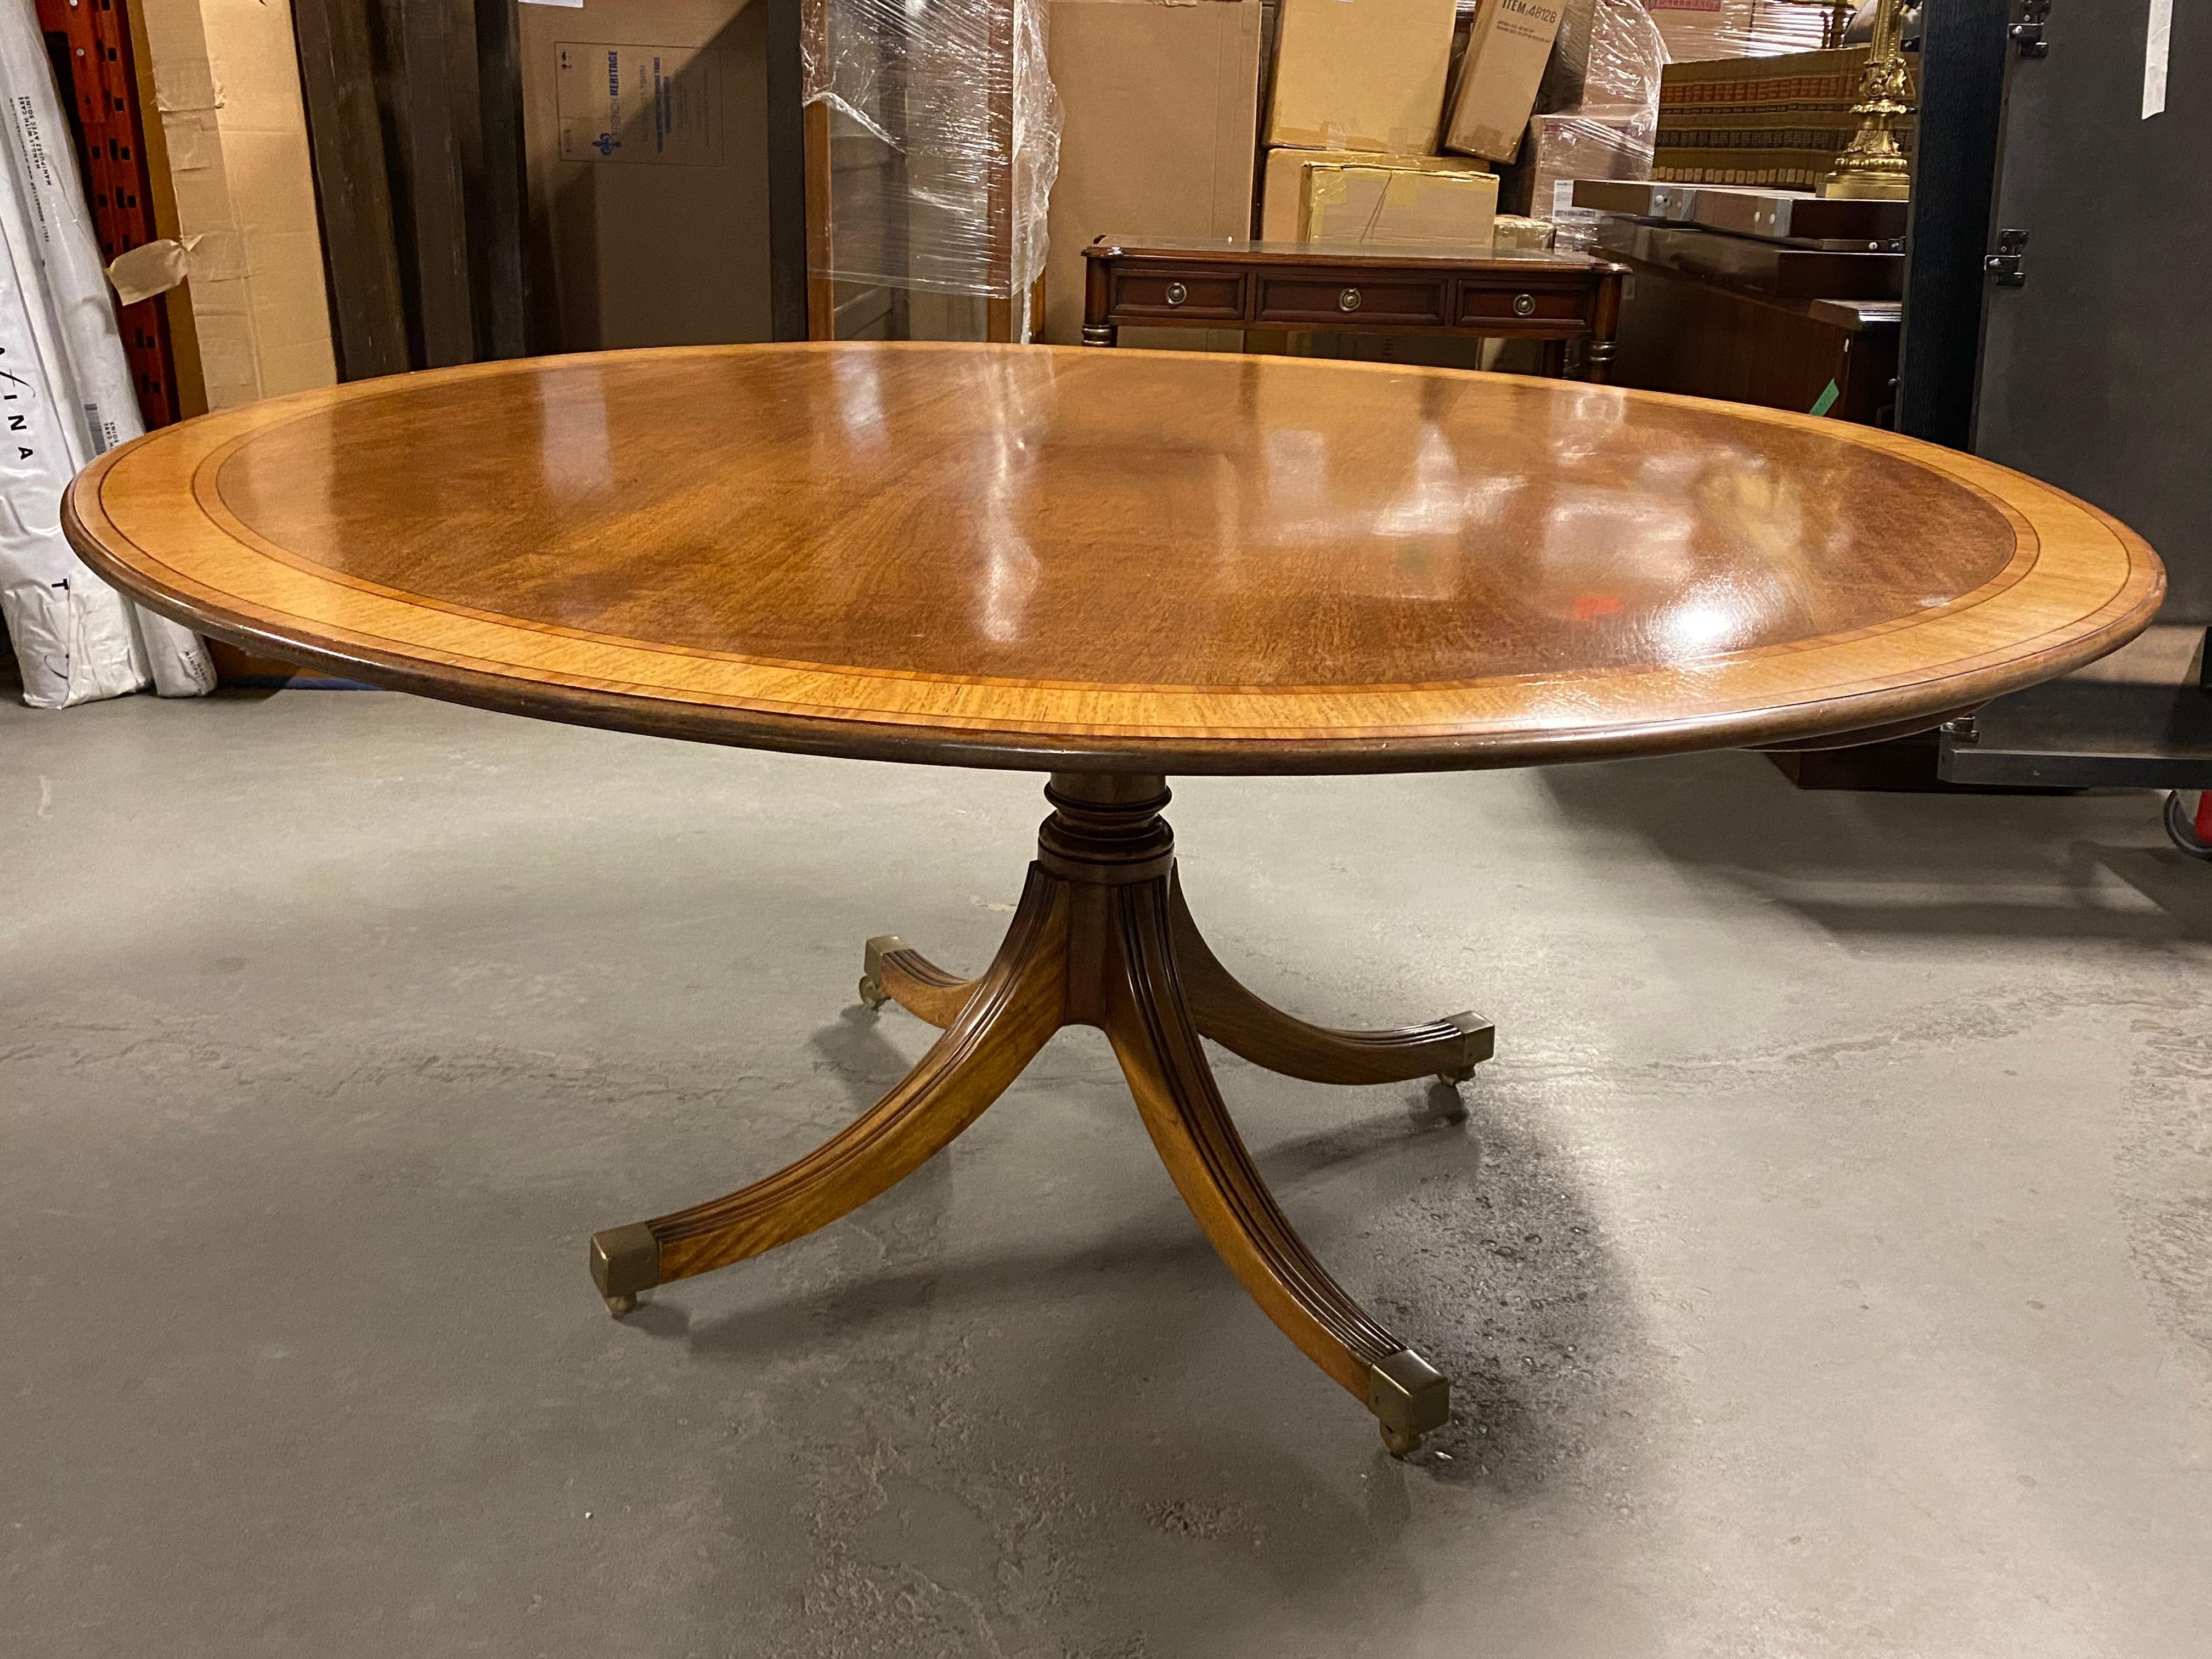 20th Century Regency Style Round Tilt-Top Table, Banded Mahogany, Made in England